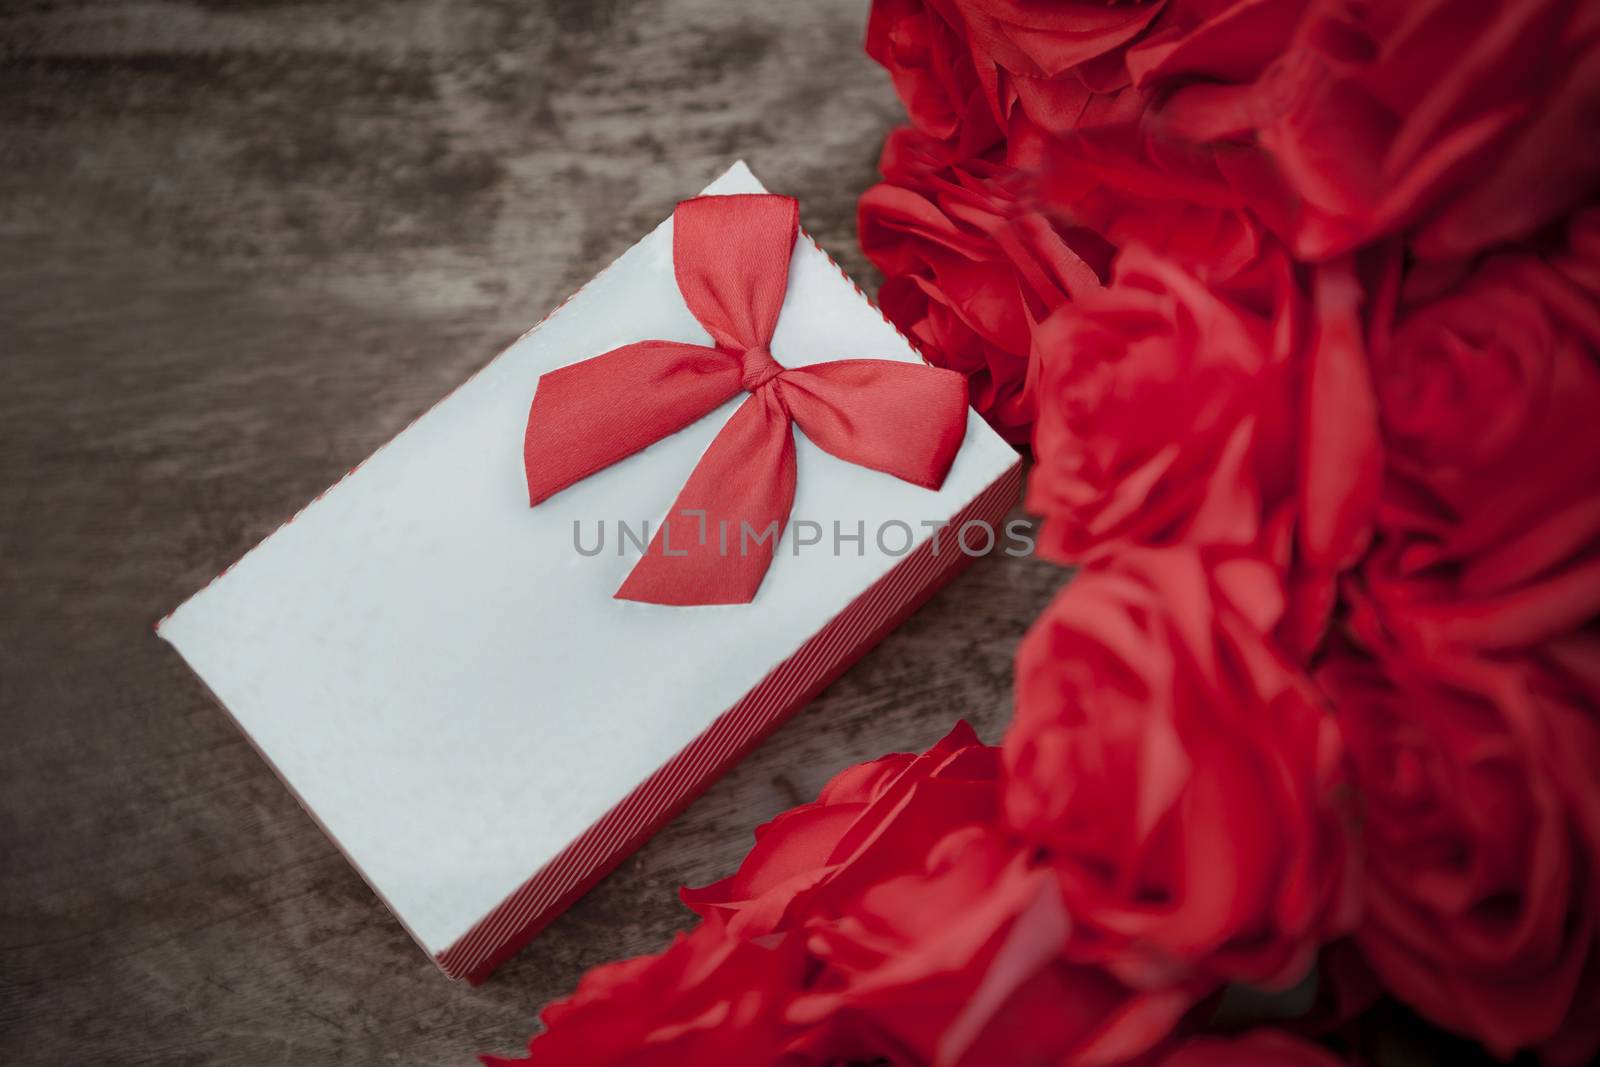 valentine gift box on wood table with red roses bouquet for love and happiness theme